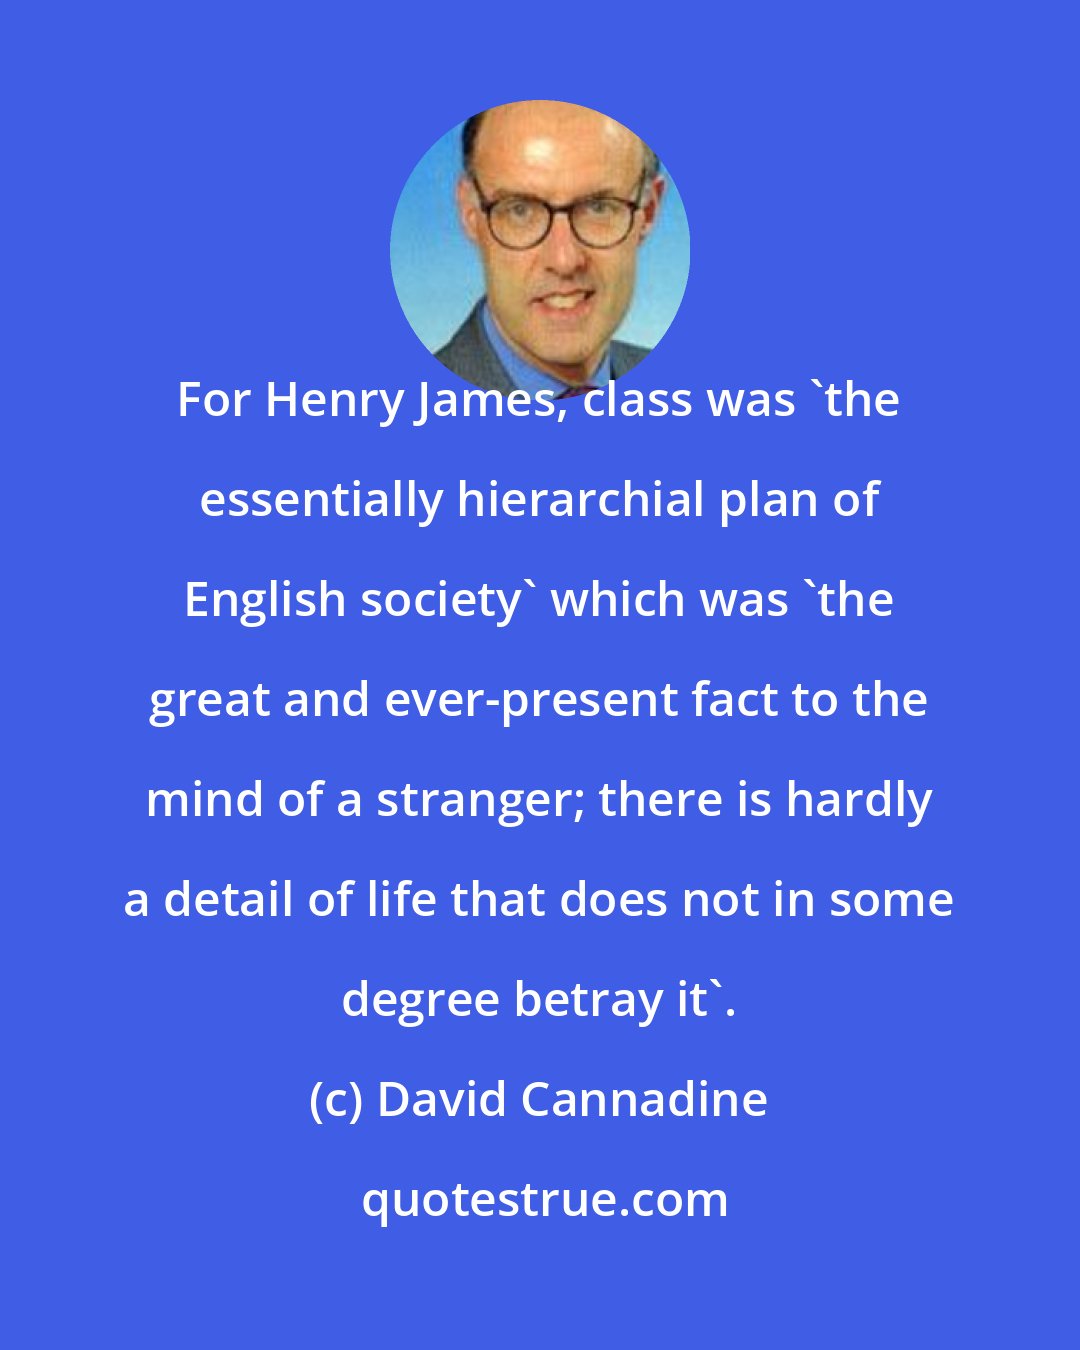 David Cannadine: For Henry James, class was 'the essentially hierarchial plan of English society' which was 'the great and ever-present fact to the mind of a stranger; there is hardly a detail of life that does not in some degree betray it'.